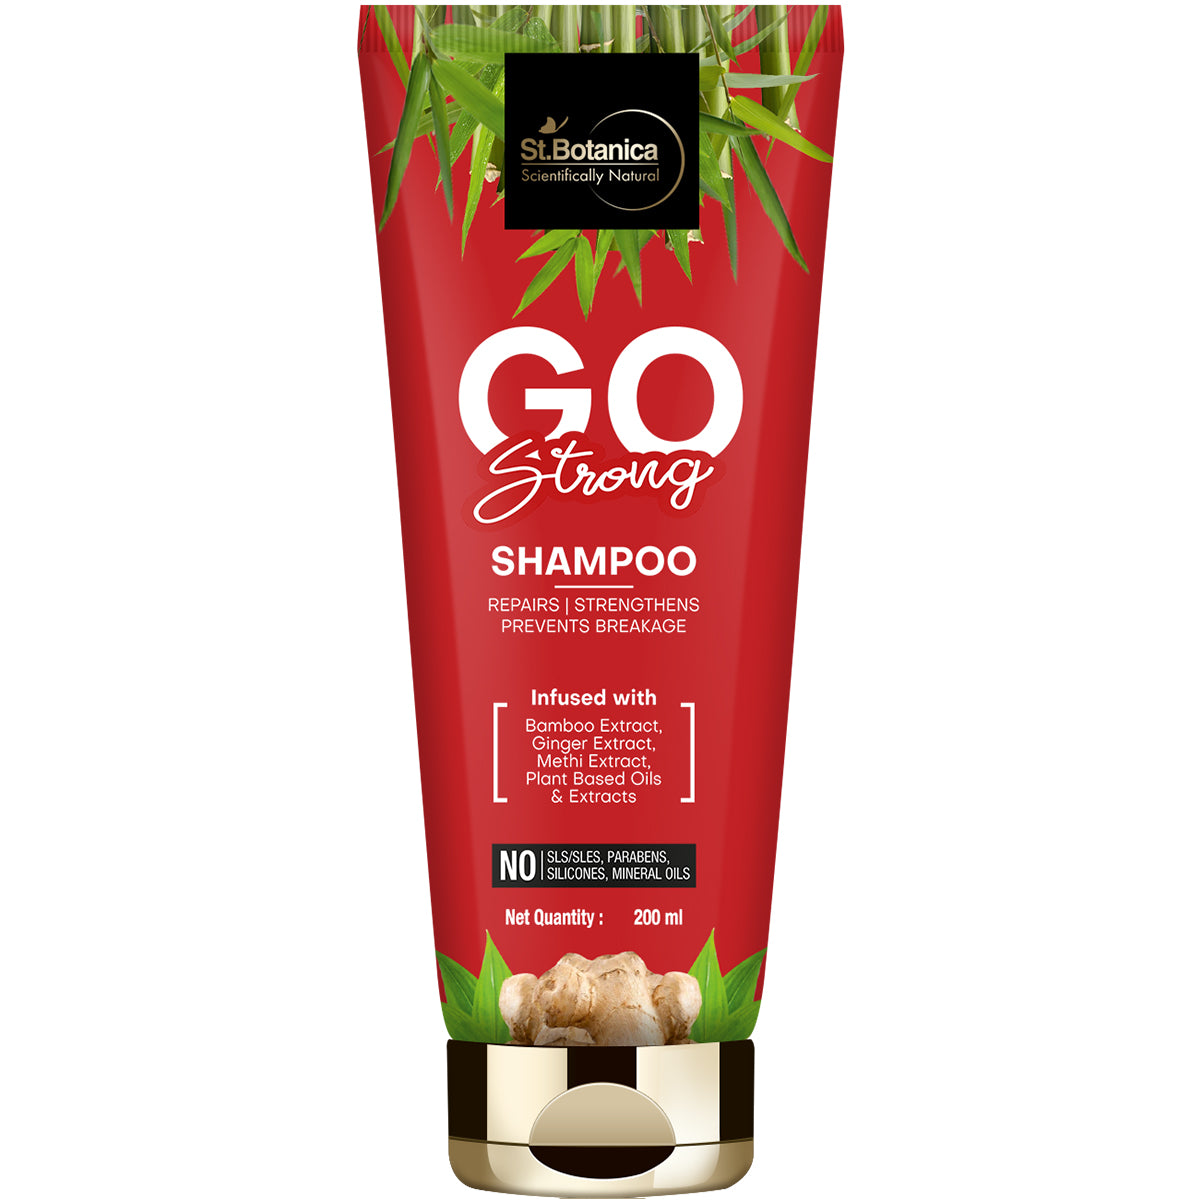 St.Botanica GO Strong Hair Shampoo - With Bamboo, Ginger, Methi Extract, No SLS / Sulphate, Paraben, Silicones, Colors, 200 ml